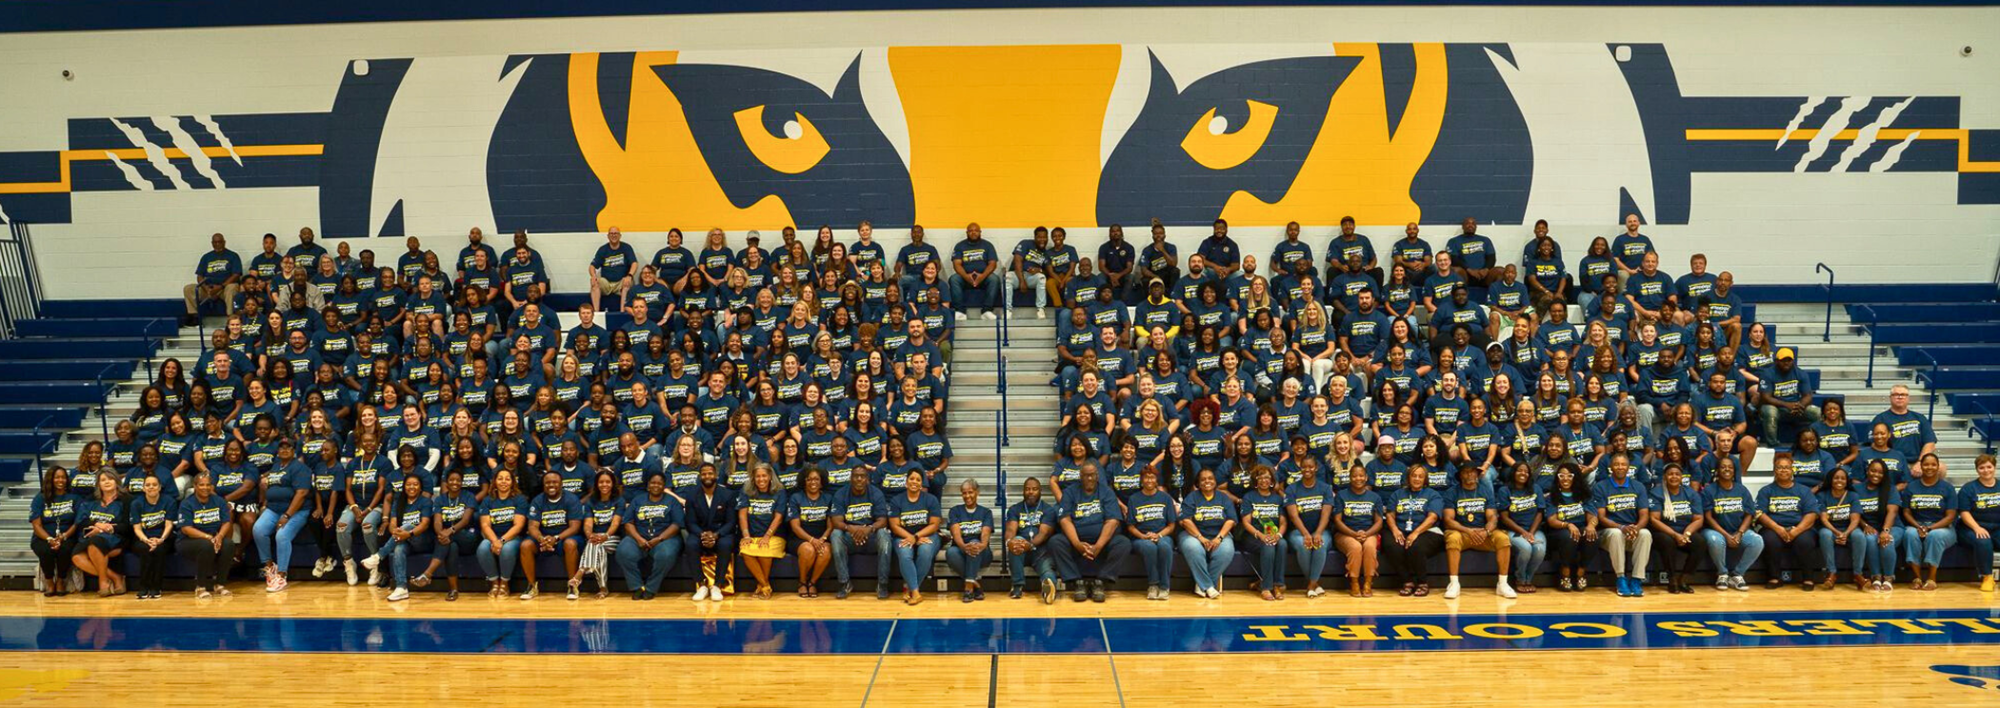 WHCSD Staff in the HS Gym group picture 